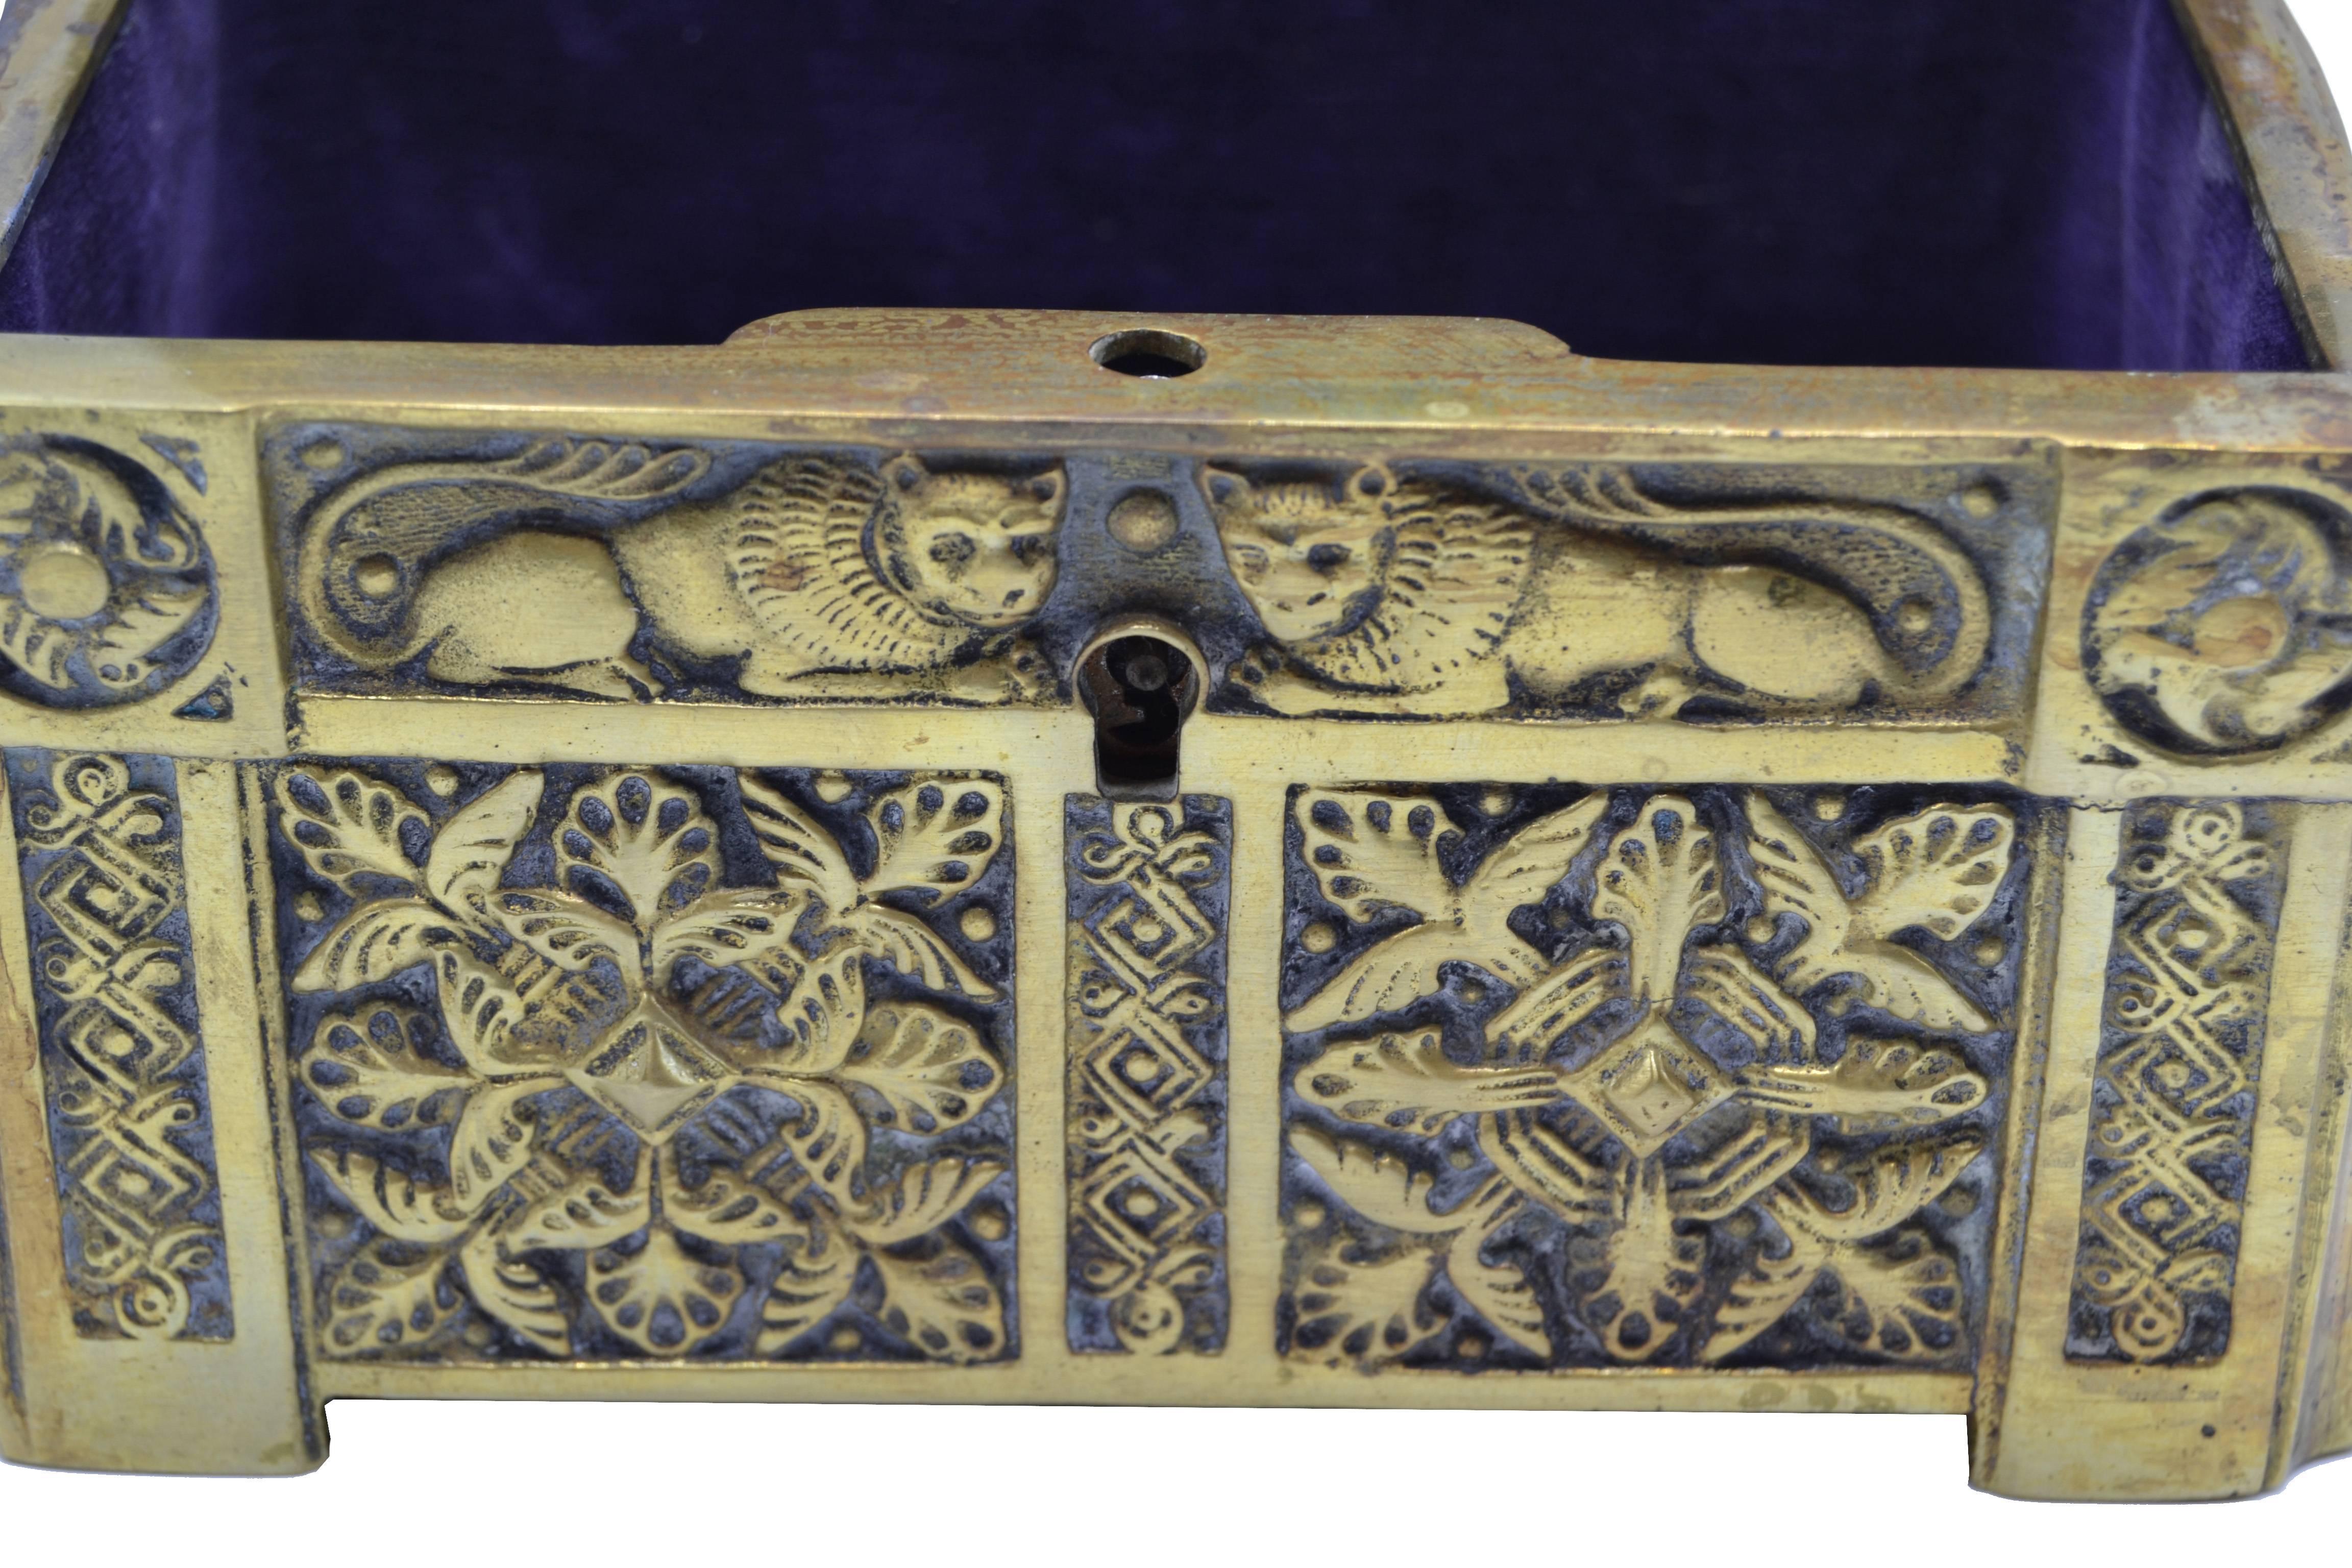 a small bronze box with engravings carried at the waist.